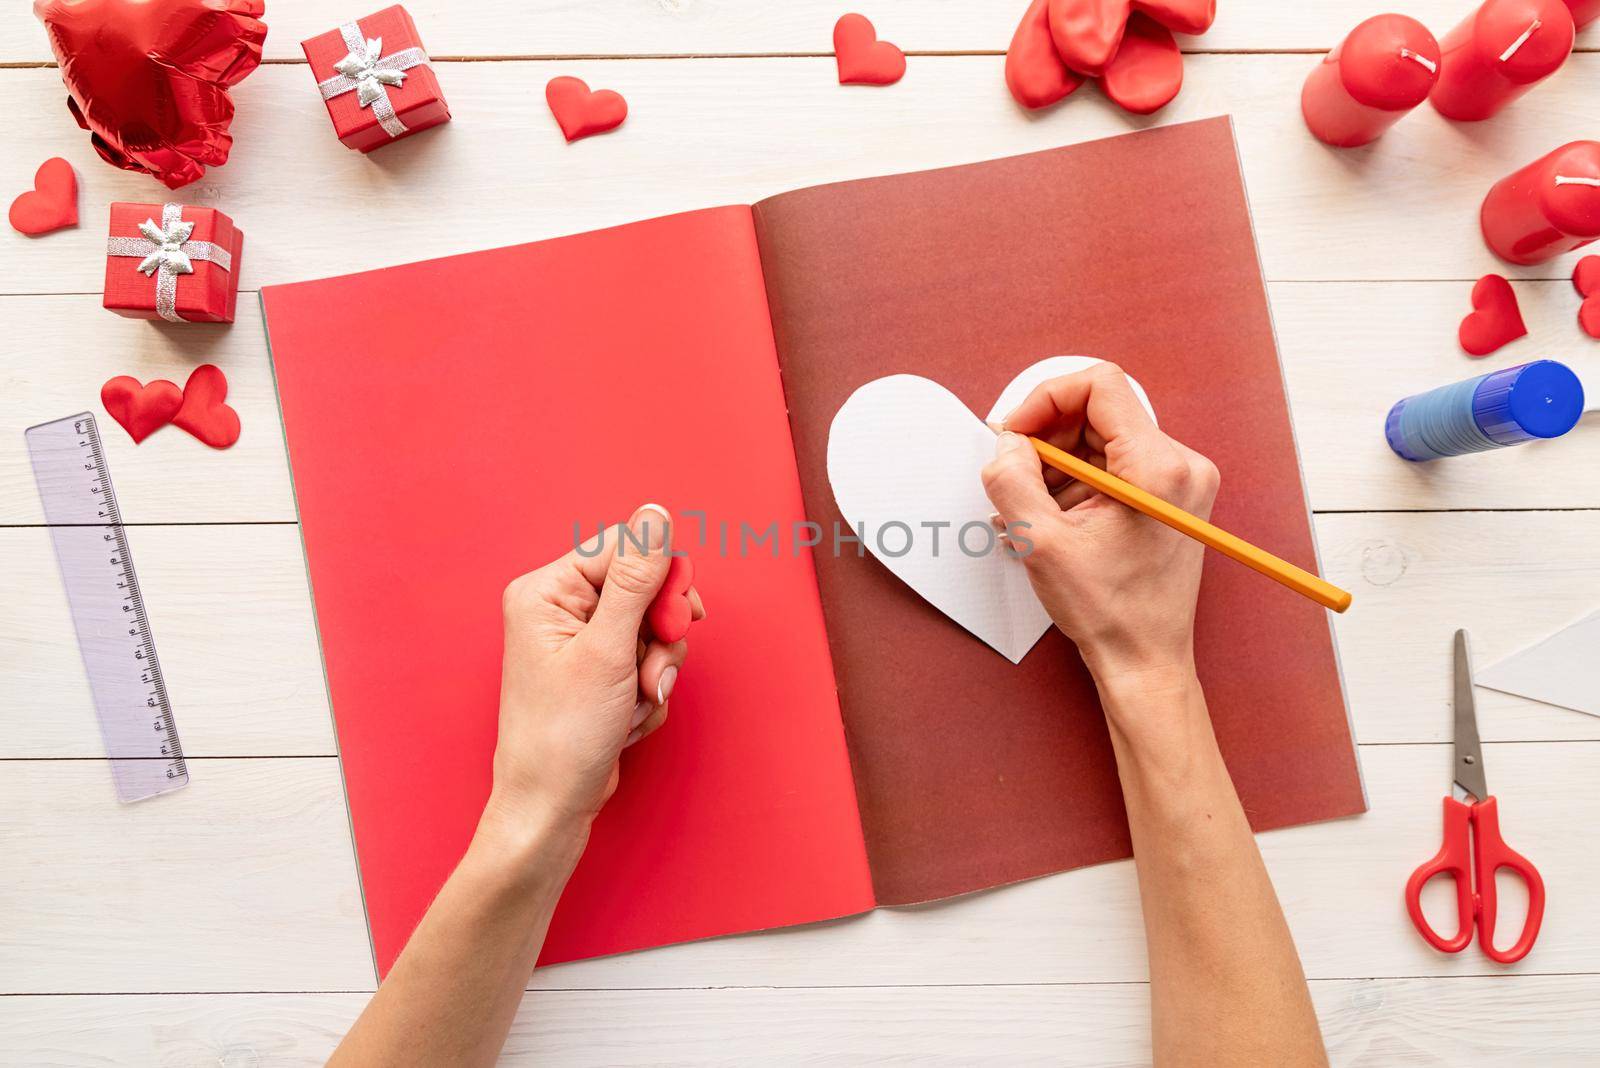 Valentines Day craft DIY. Step by step instruction making paper heart shape hot air balloon. Step 3 - use the heart template to draw three hearts on colored paper